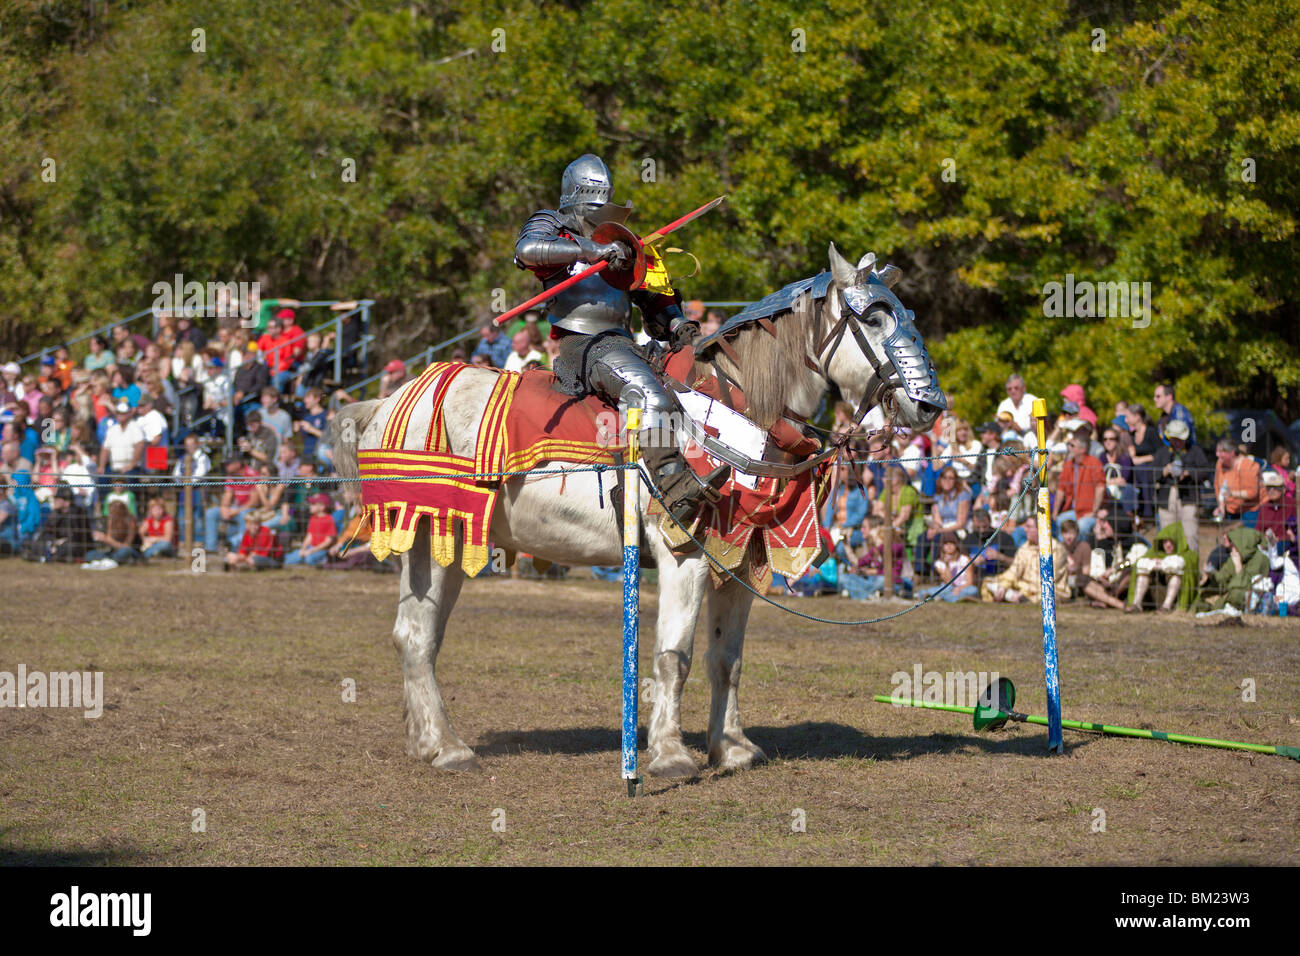 Gainesville FL - Jan 2009 - Man dressed as knight with broken lance on jousting field at Hoggetowne Medieval Faire Stock Photo